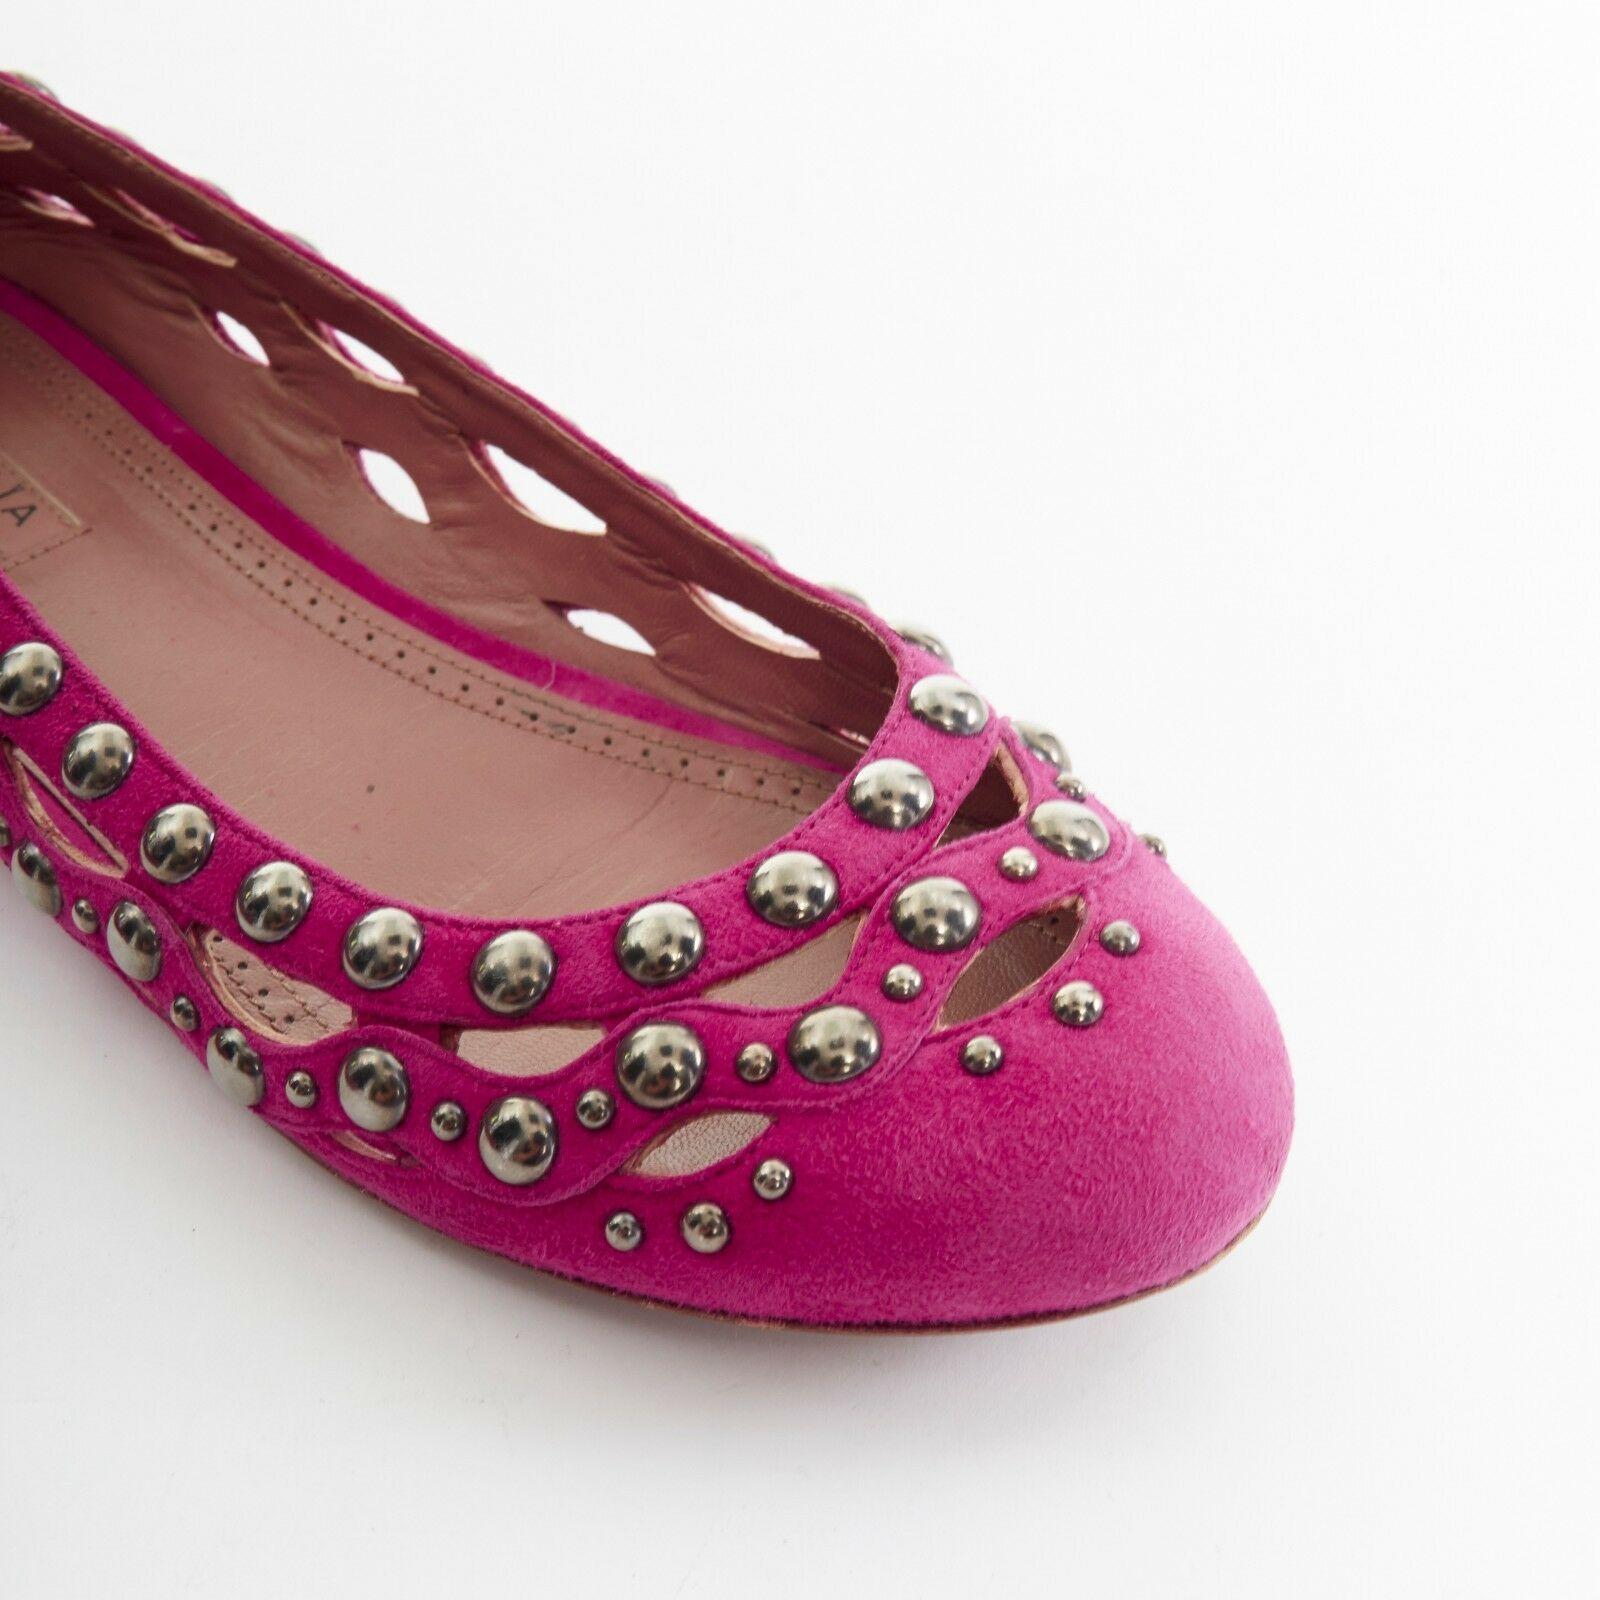 Women's ALAIA pink suede silver studded cut out round toe ballerina flat shoes EU38 US8